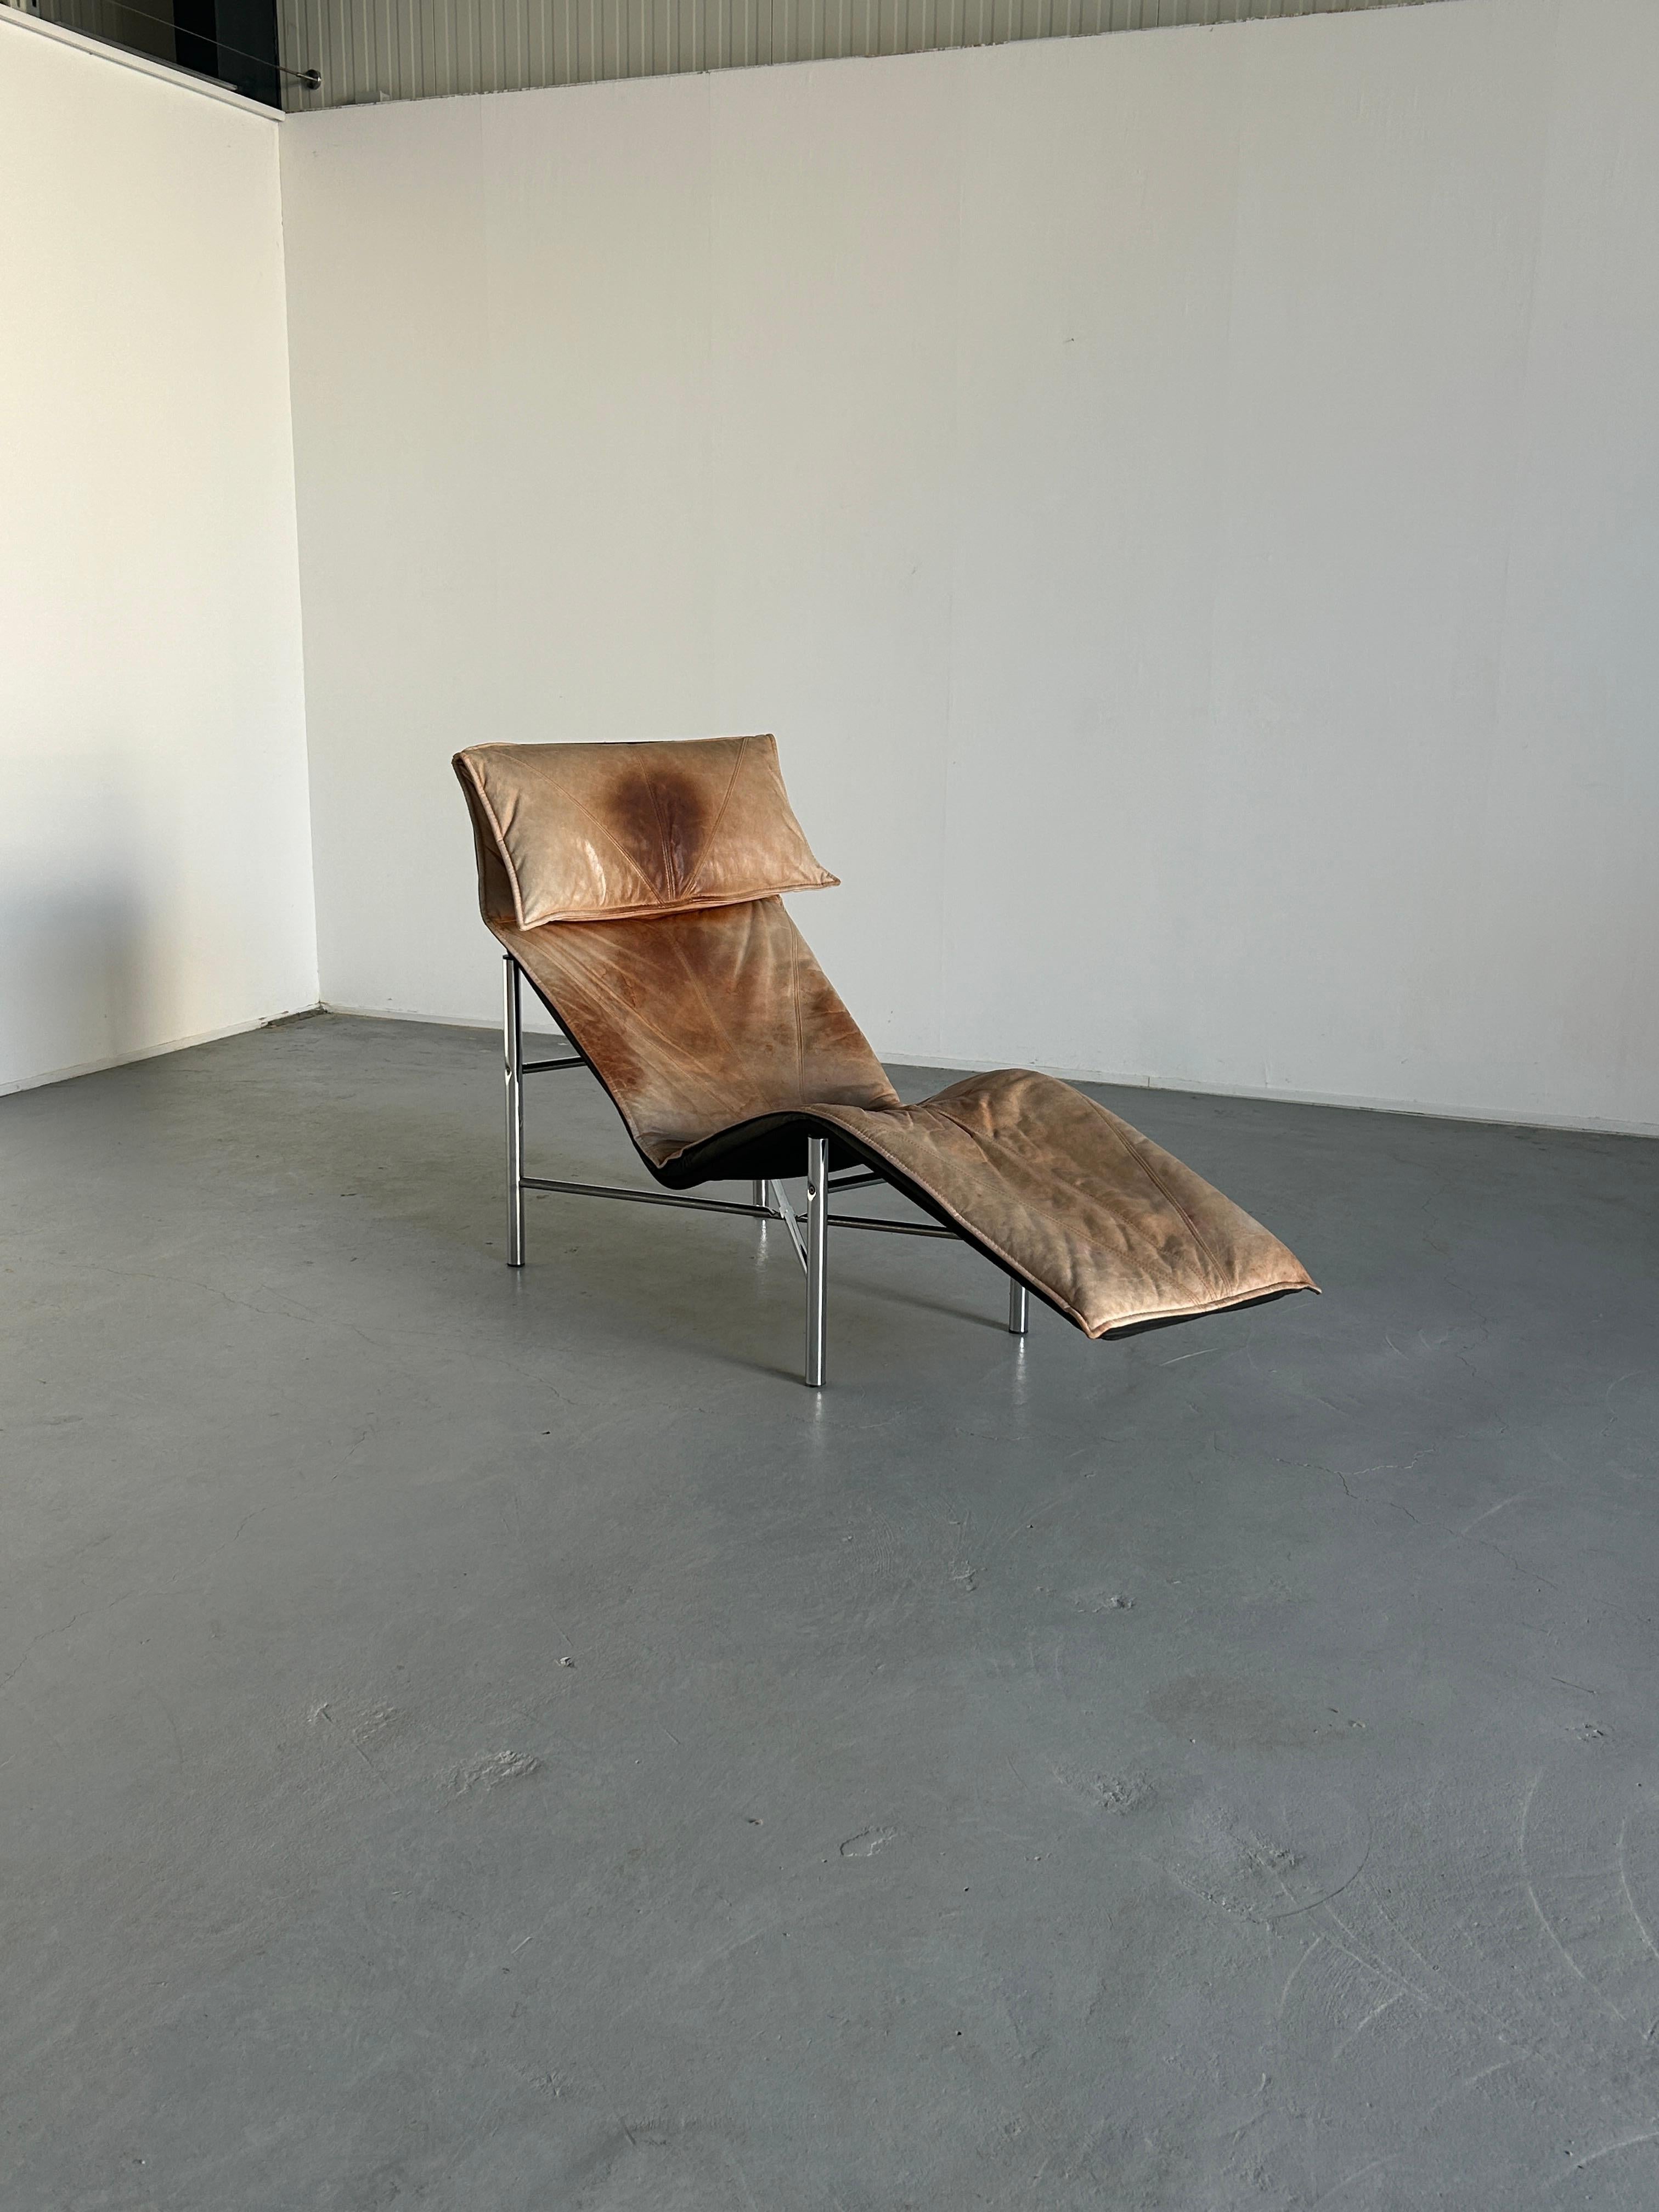 Modern freestanding vintage chaise longue or daybed from cognac brown stitched leather and metal by Tord Bjorklund for Ikea, 1980s.

A stylish and very comfortable chaise longue or daybed from metal with a loose cushion from thick stitched leather